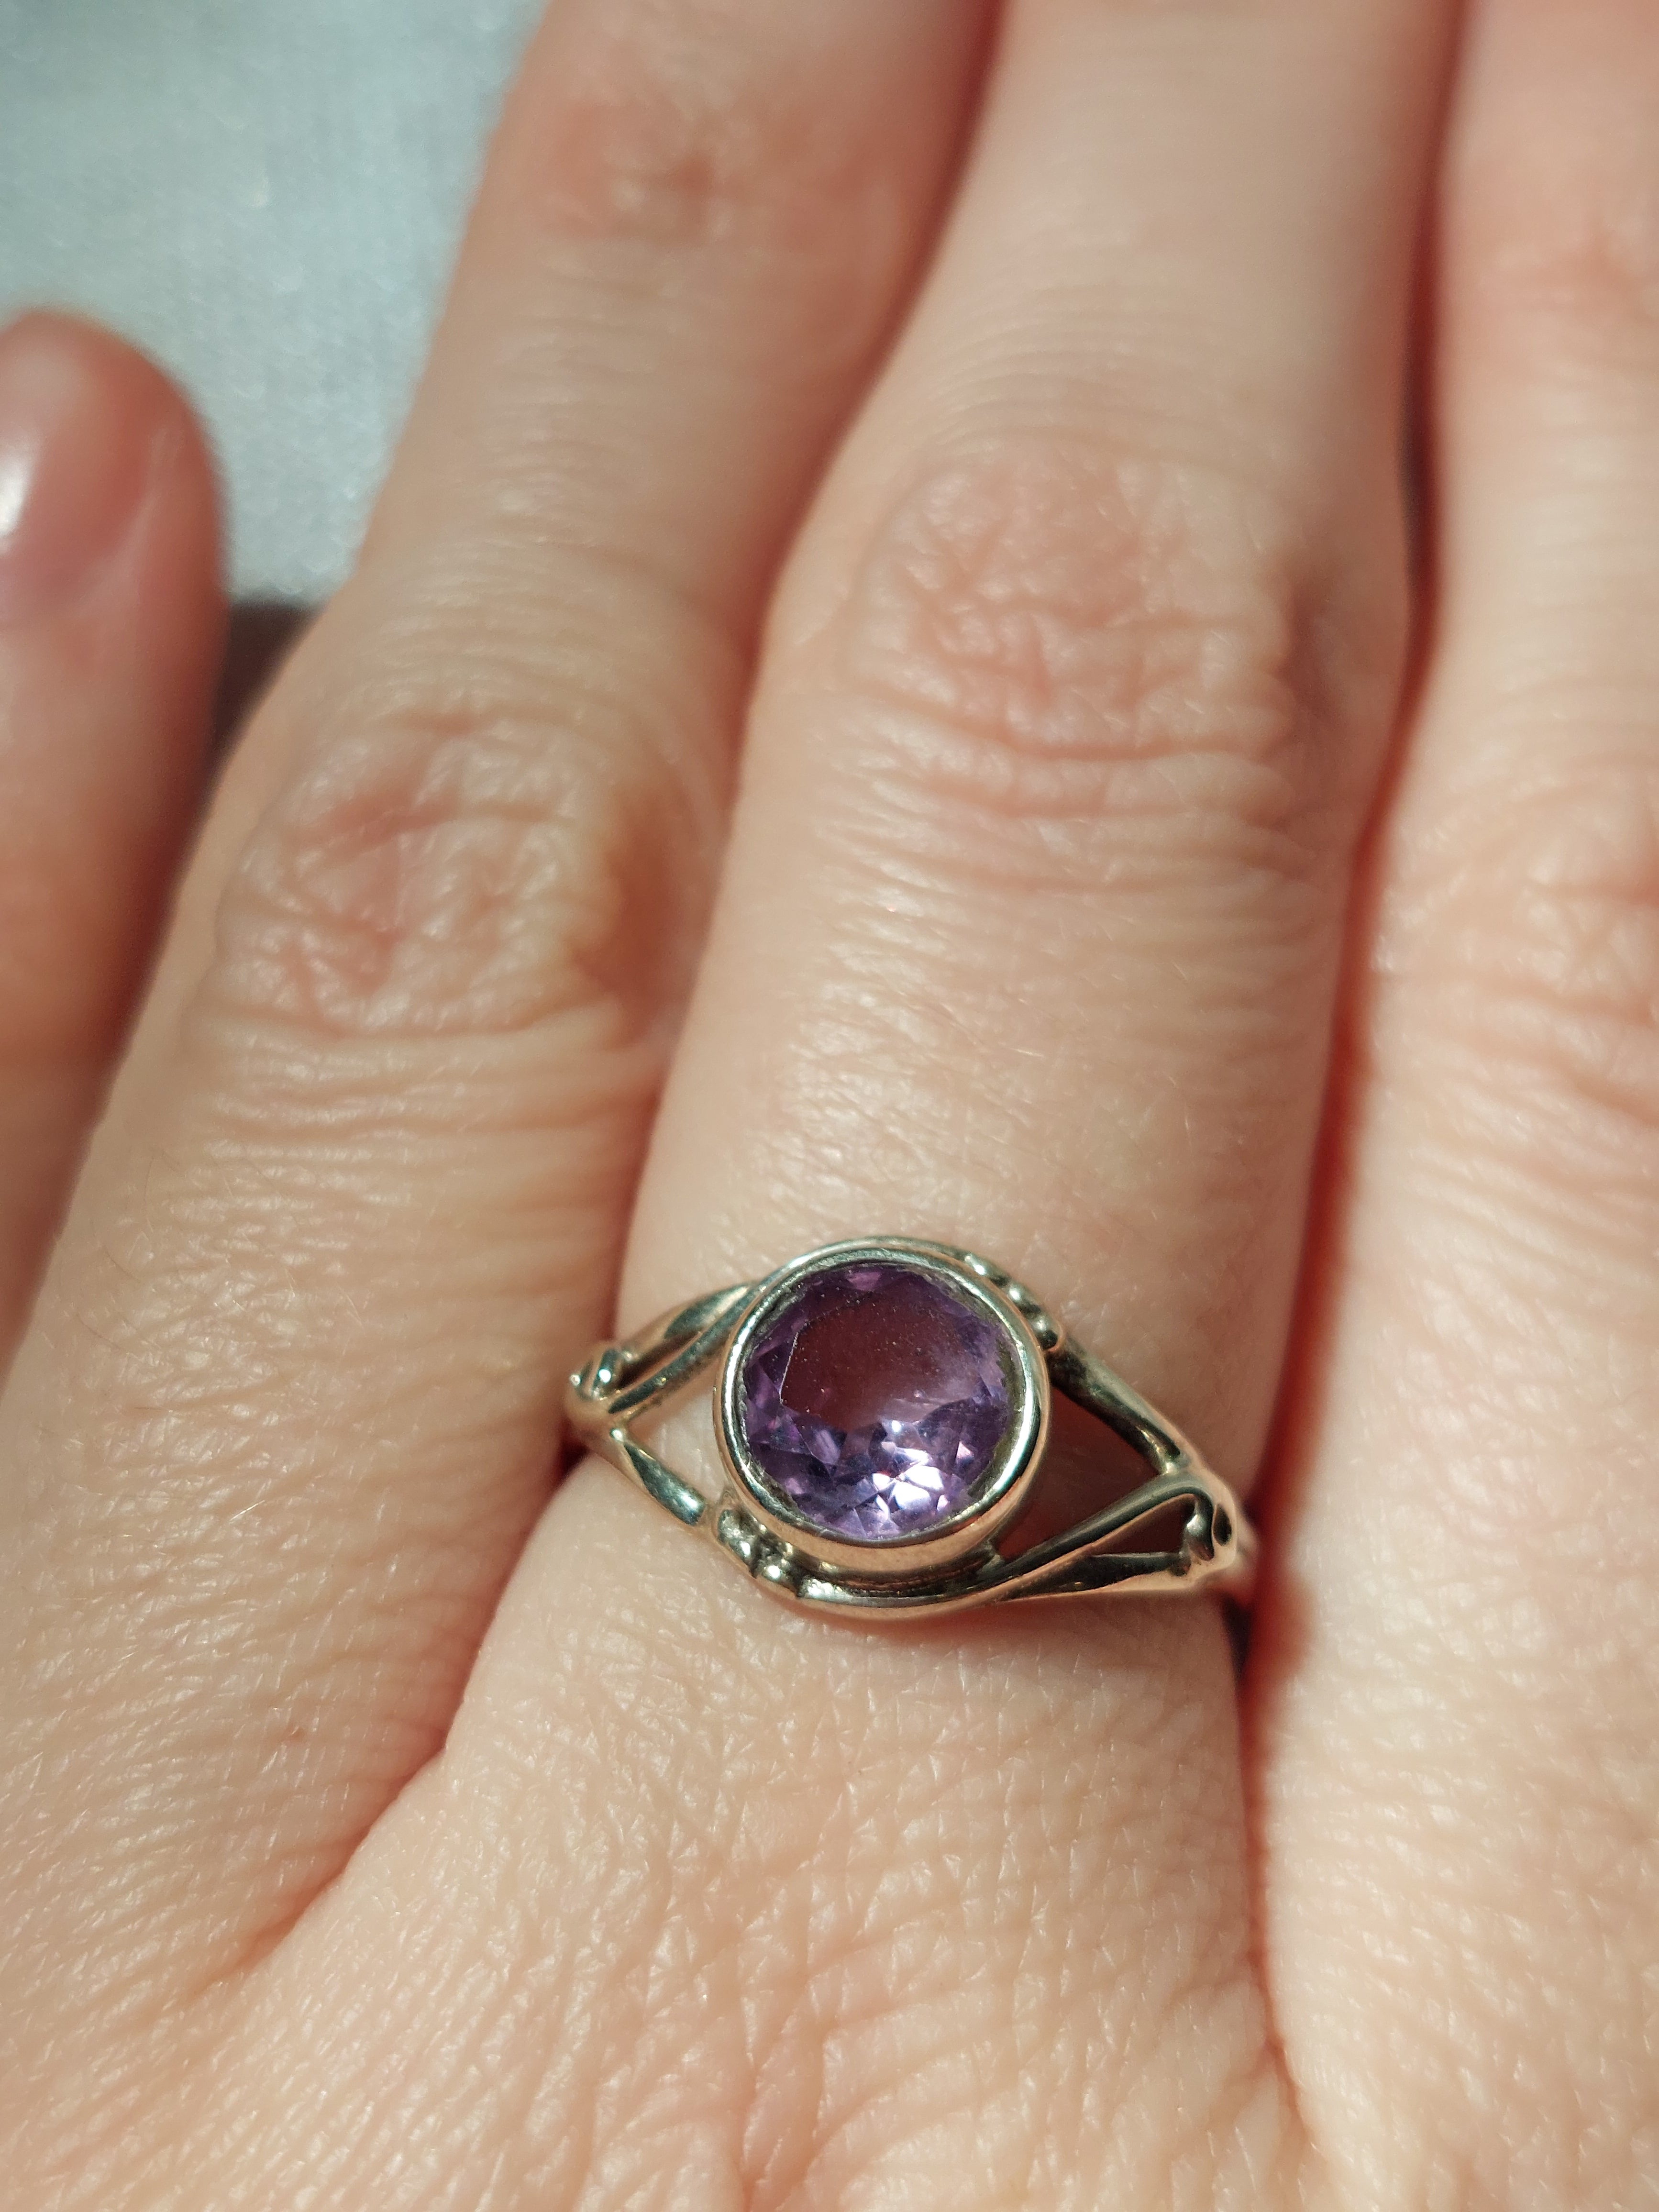 Circular Amethyst on Swirl Band Ring - Size 7 - 925 Sterling Silver